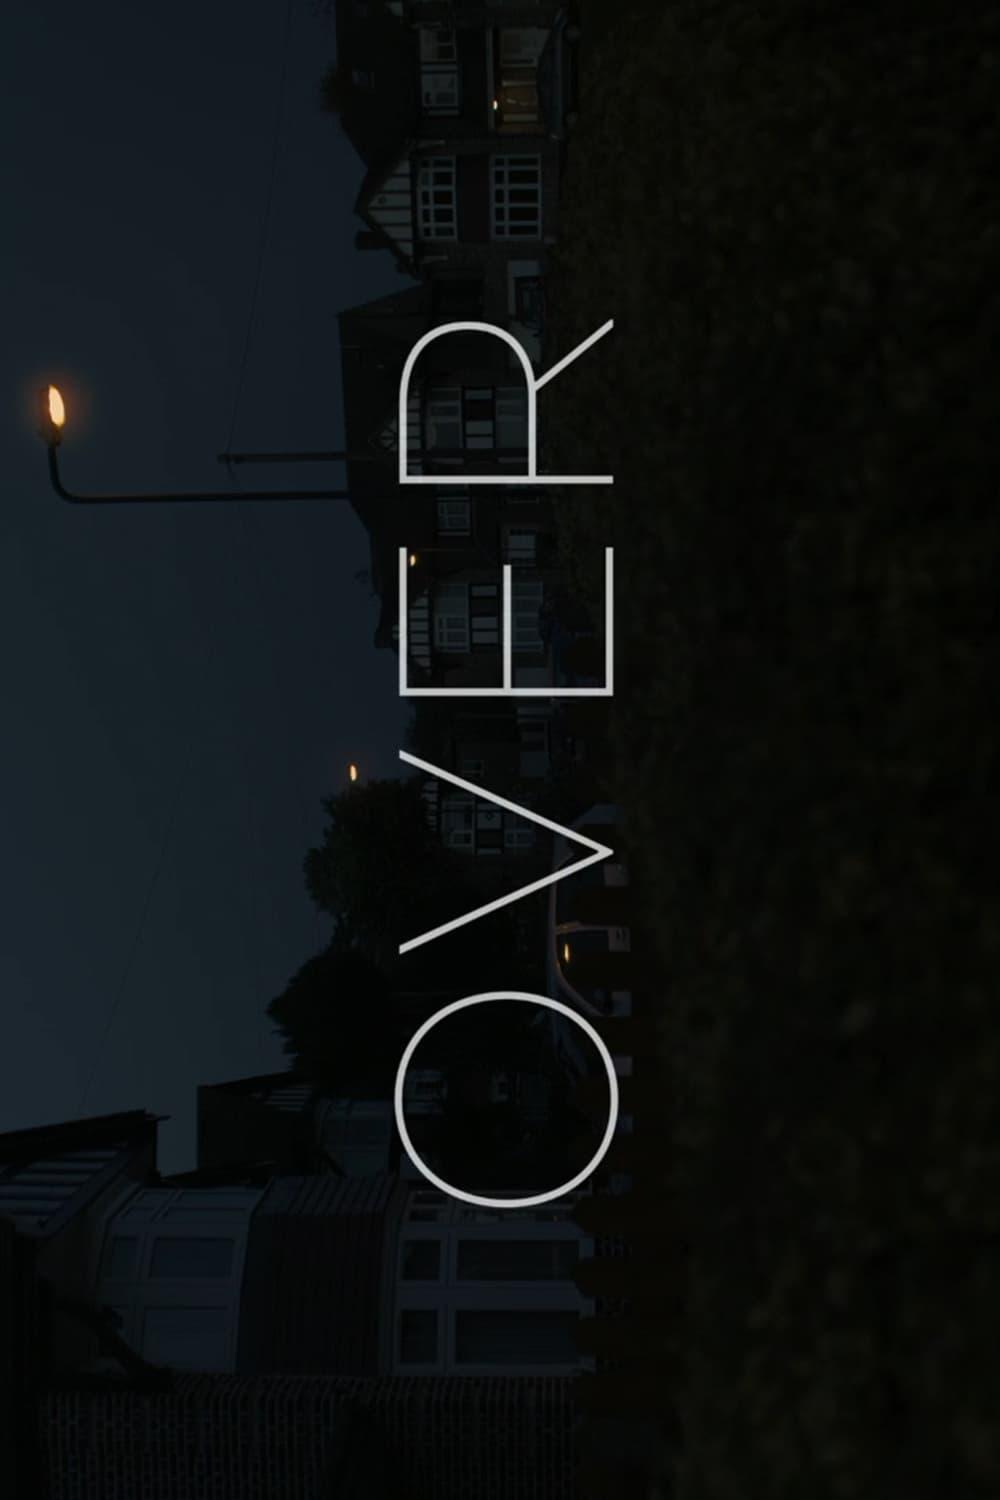 Over poster